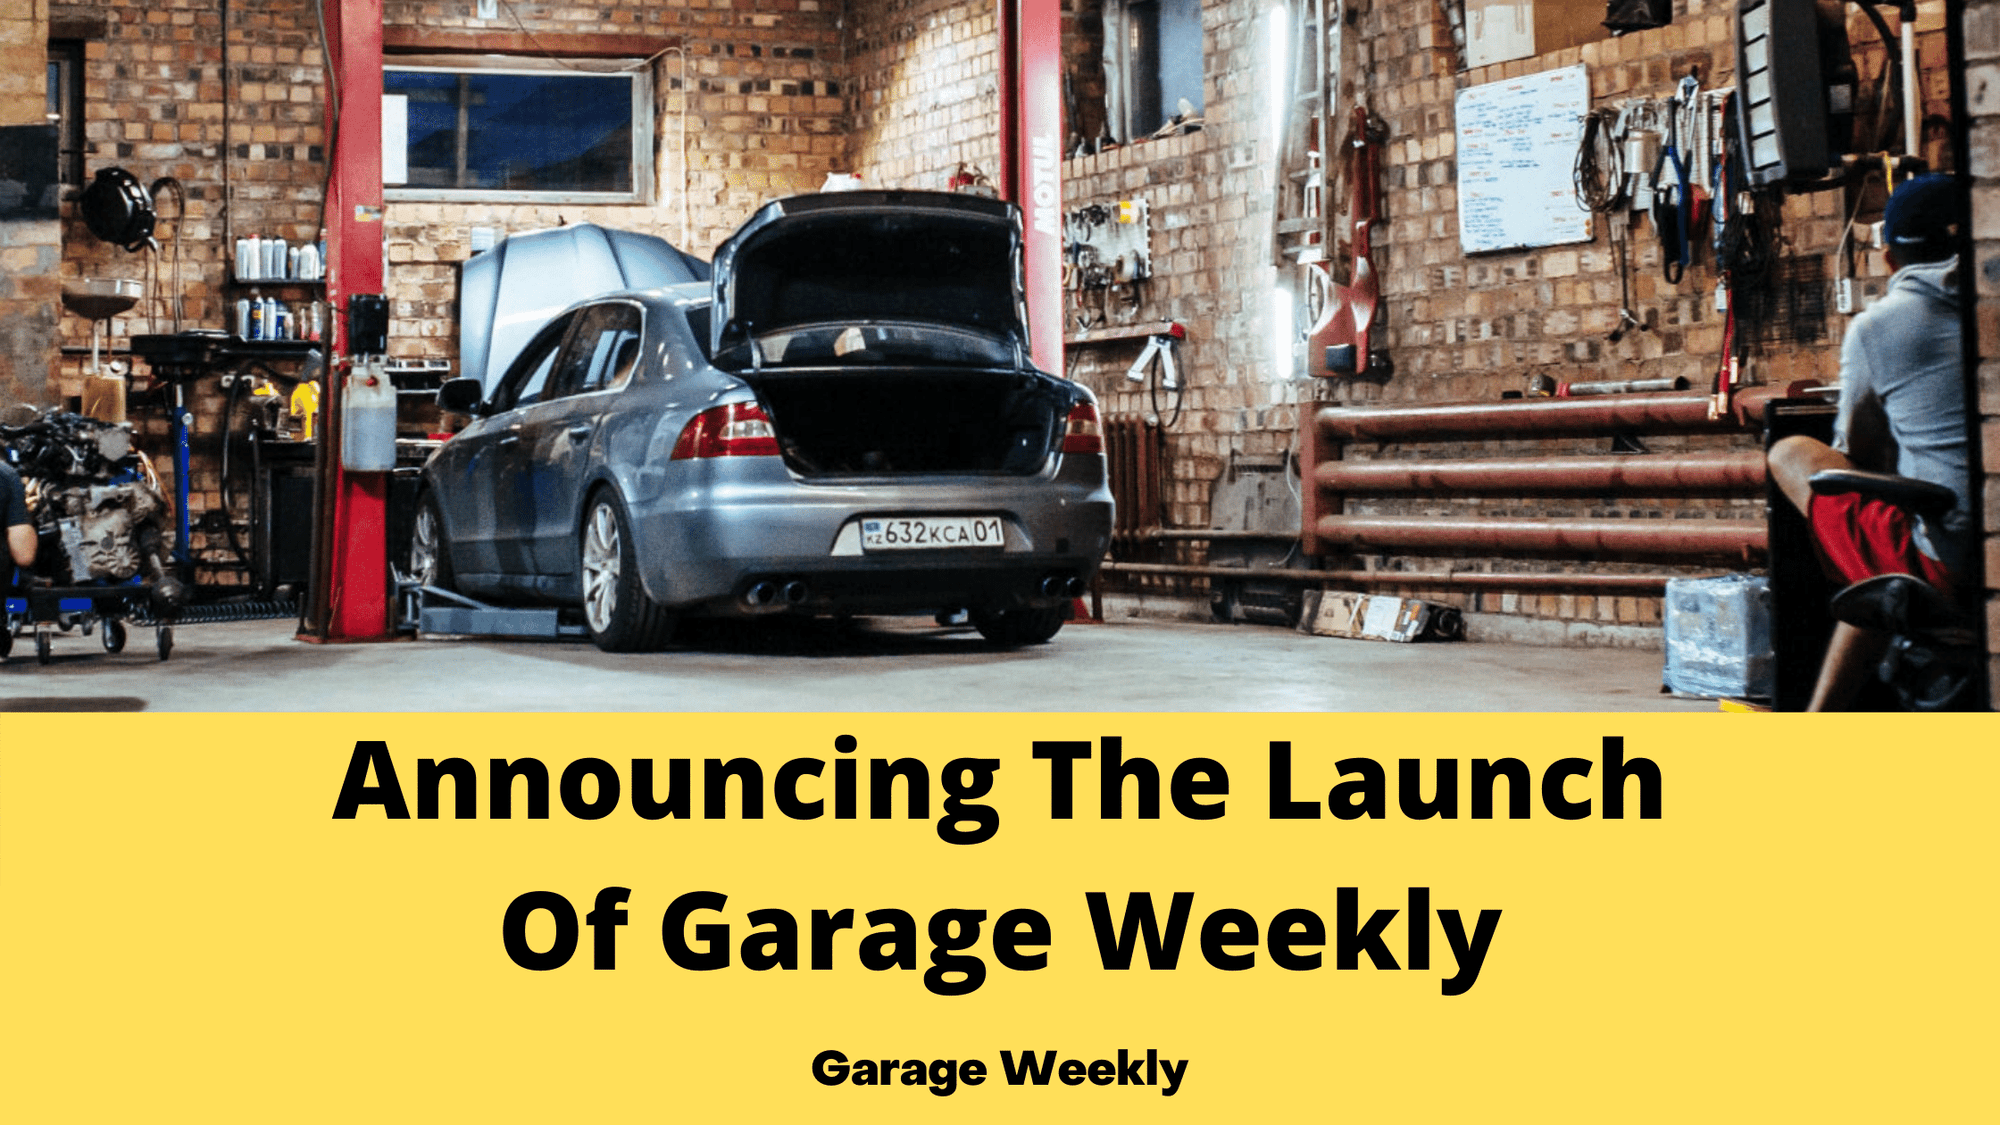 Announcing The Launch Of Garage Weekly